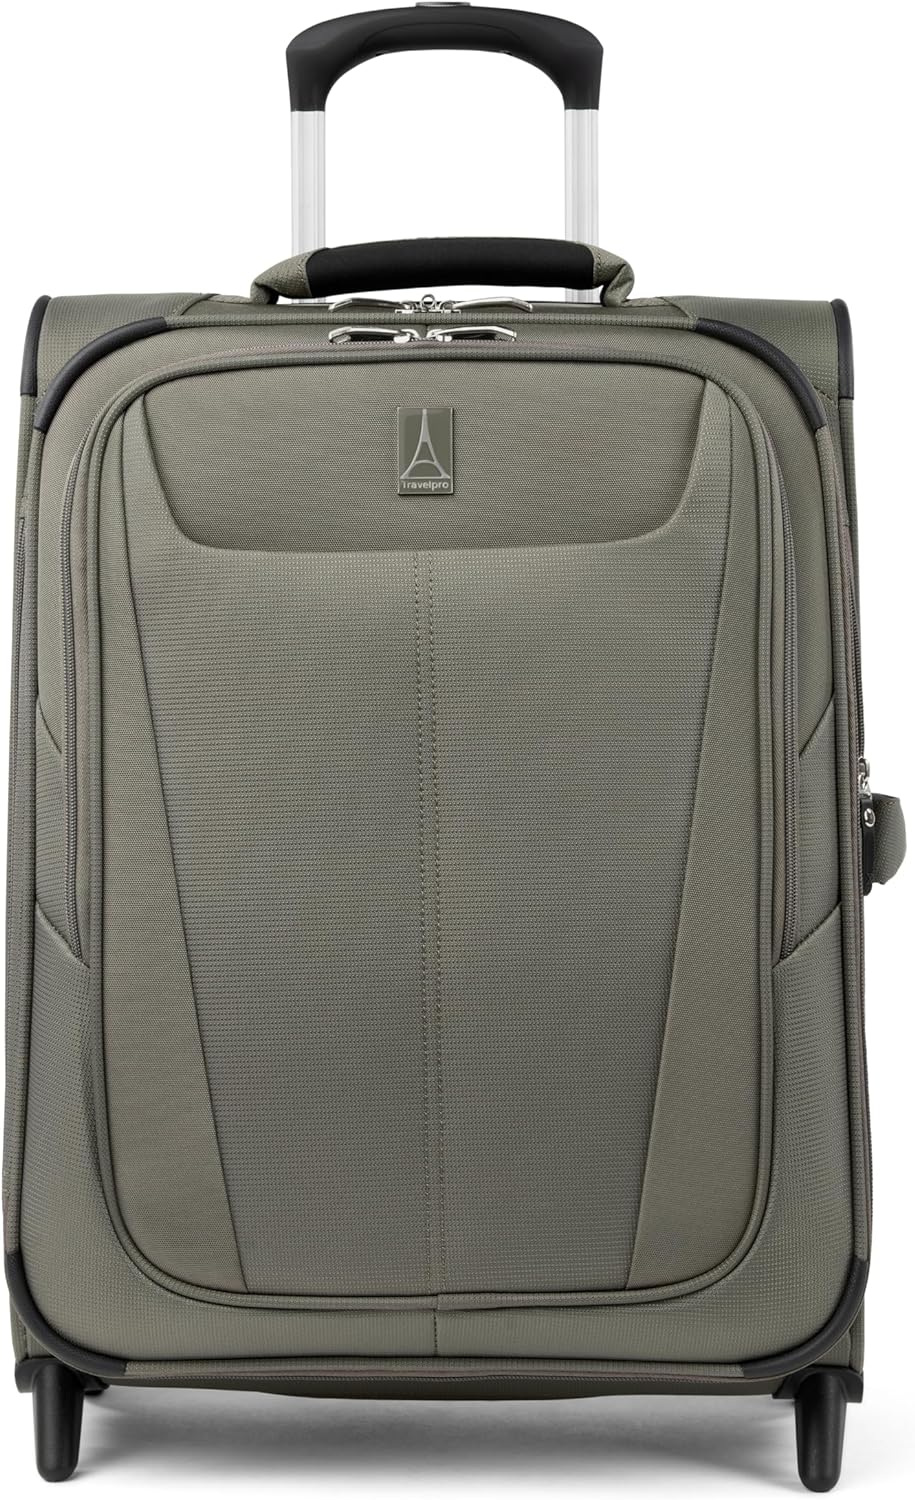 Travelpro Maxlite 5 Softside Expandable Upright 2 Wheel Carry on Luggage, Lightweight Suitcase, Men and Women, Slate Green, Carry On 20-Inch